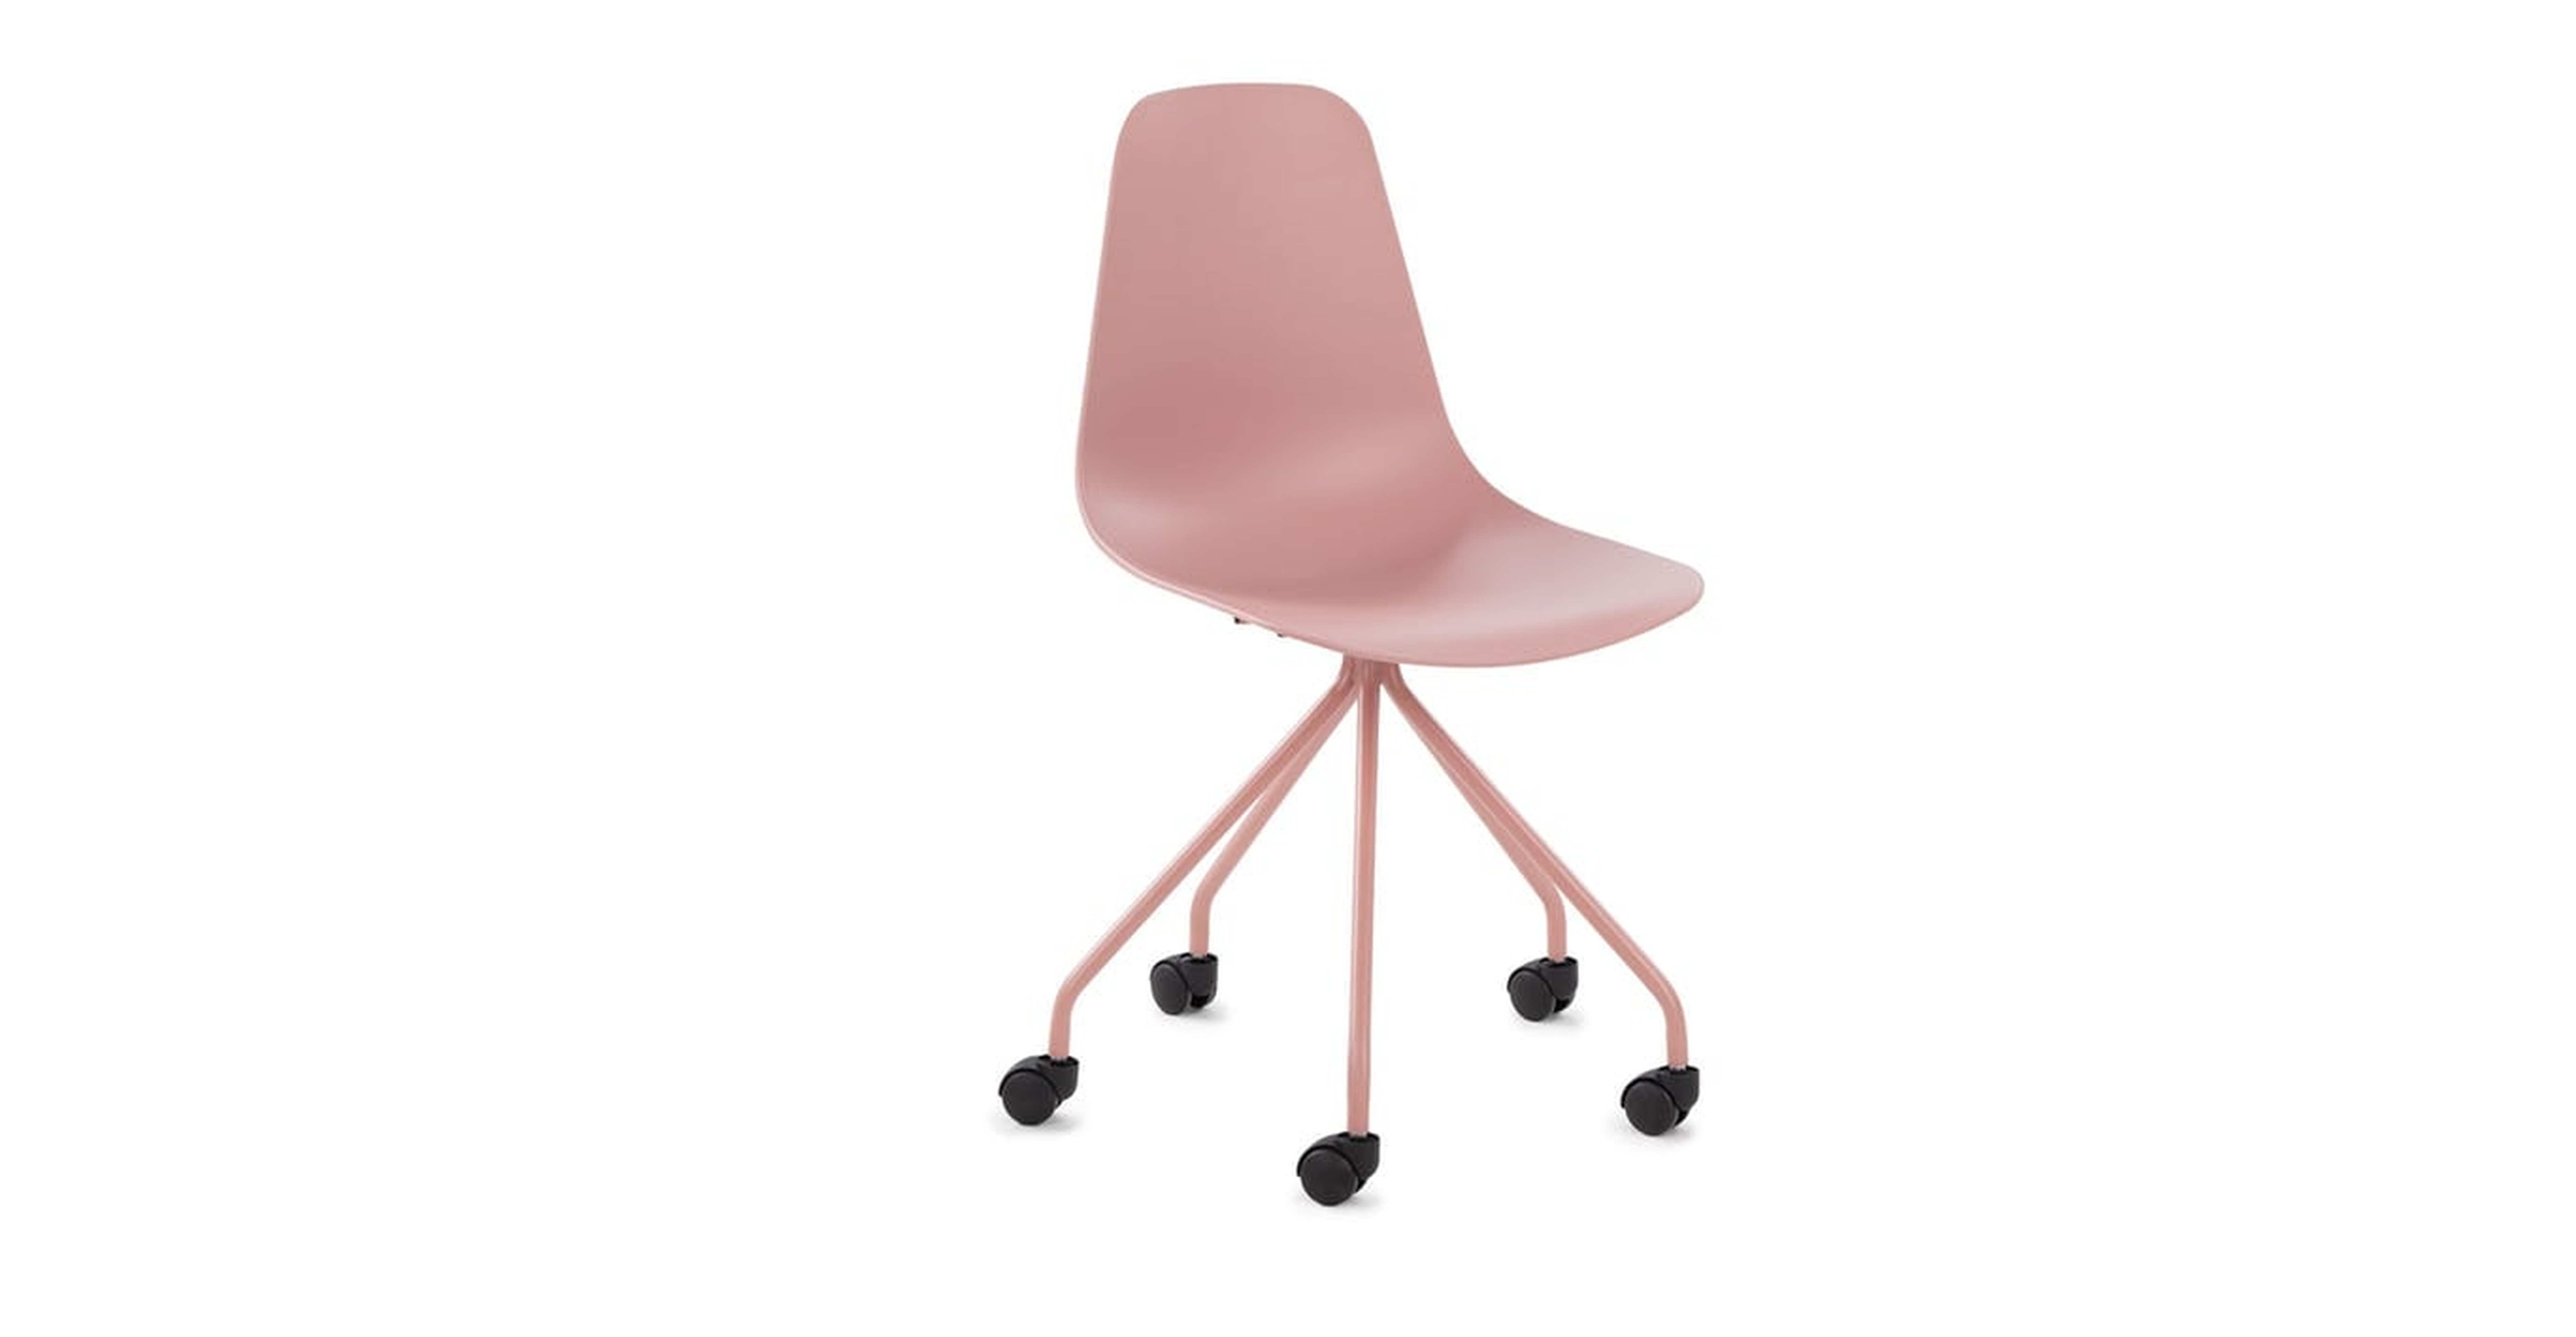 Svelti Dusty Pink Office Chair - Article